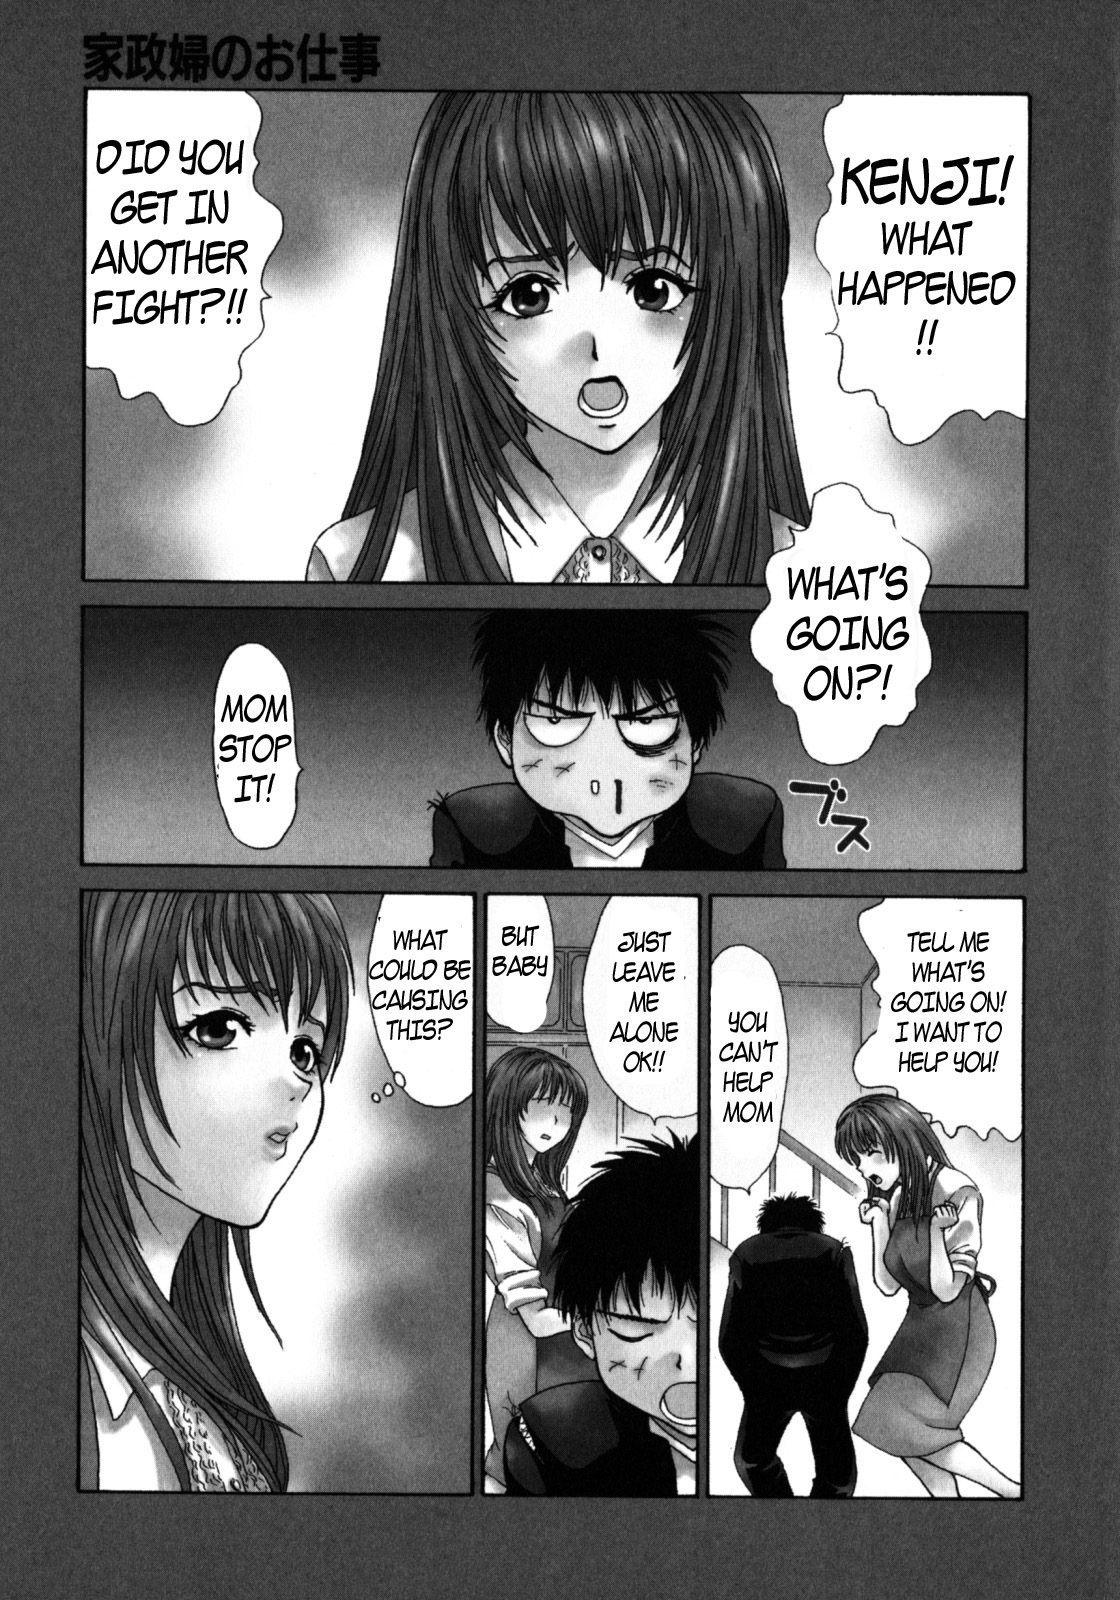 Concerned Mother [English] [Rewrite] [EZ Rewriter] page 1 full